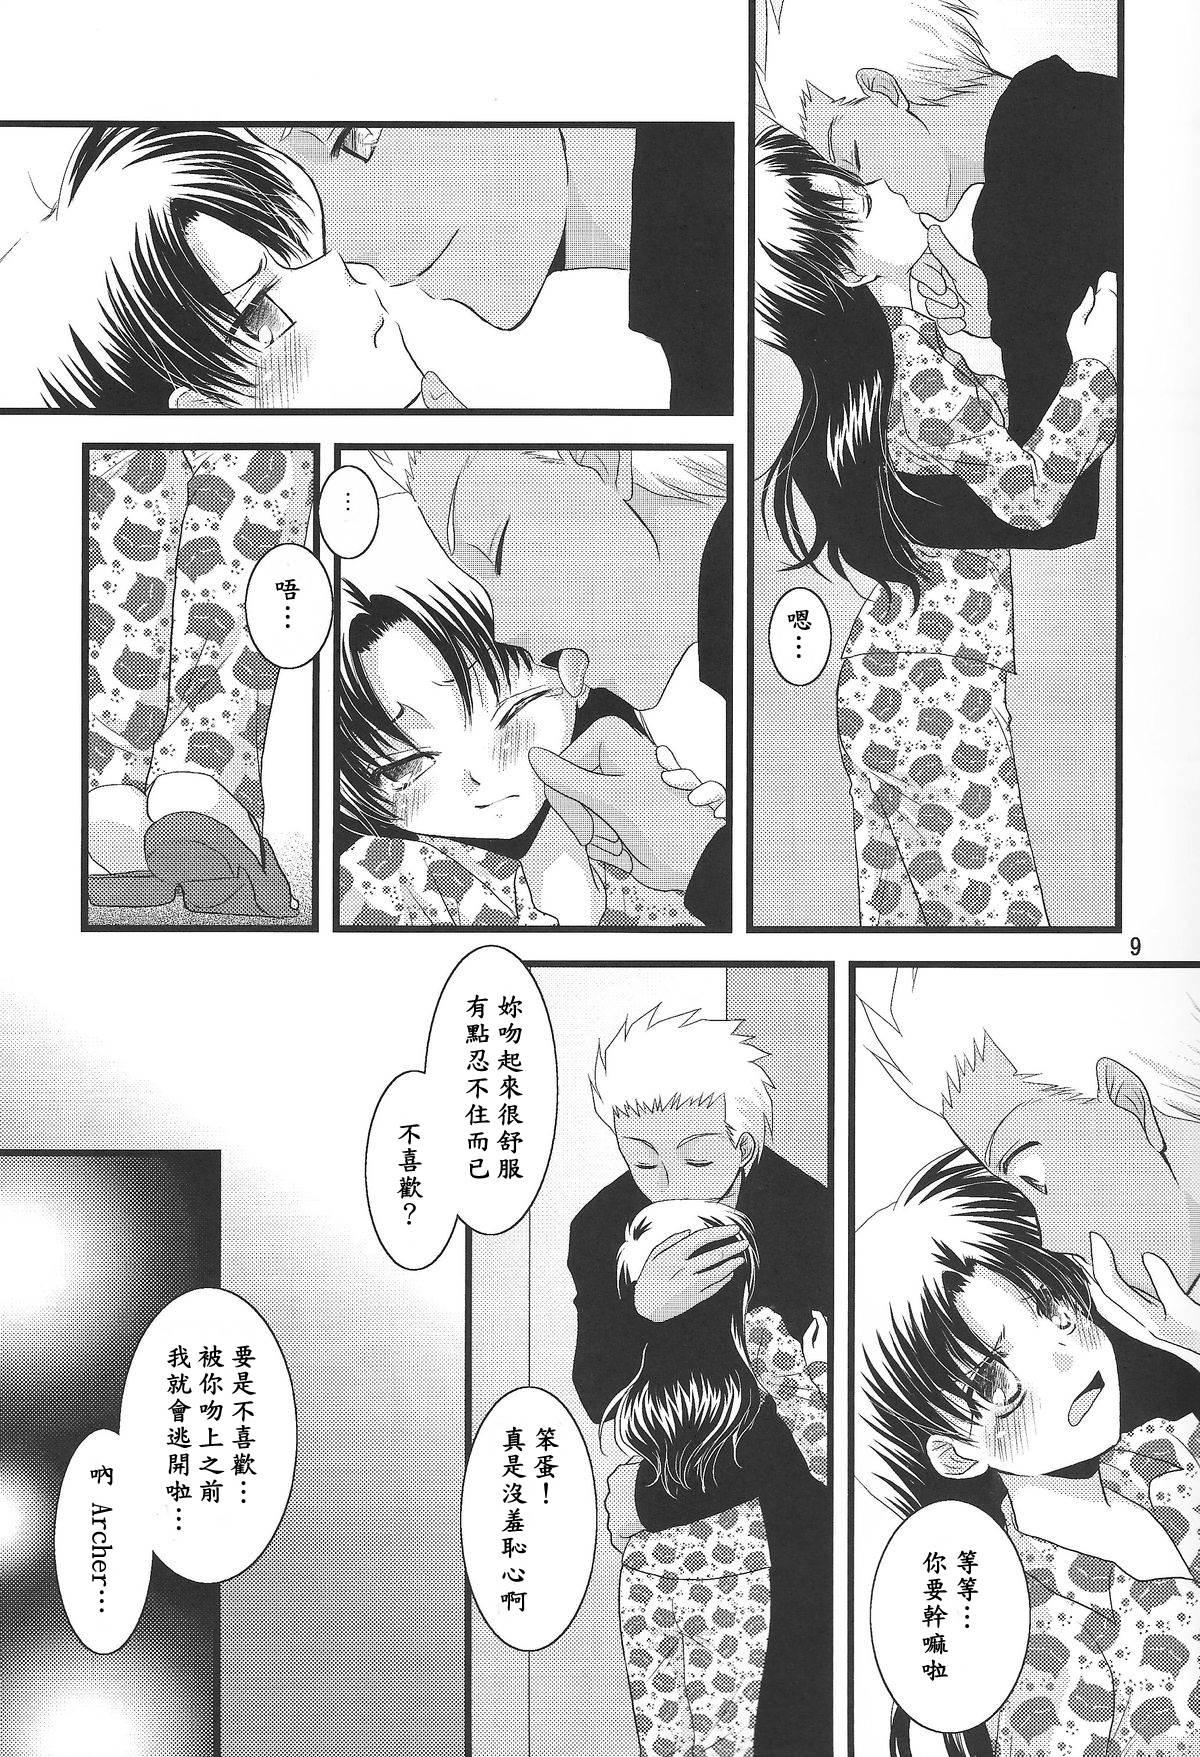 Sex Toy A Midsummer Night's Dream - Fate stay night Amateur Sex - Page 6